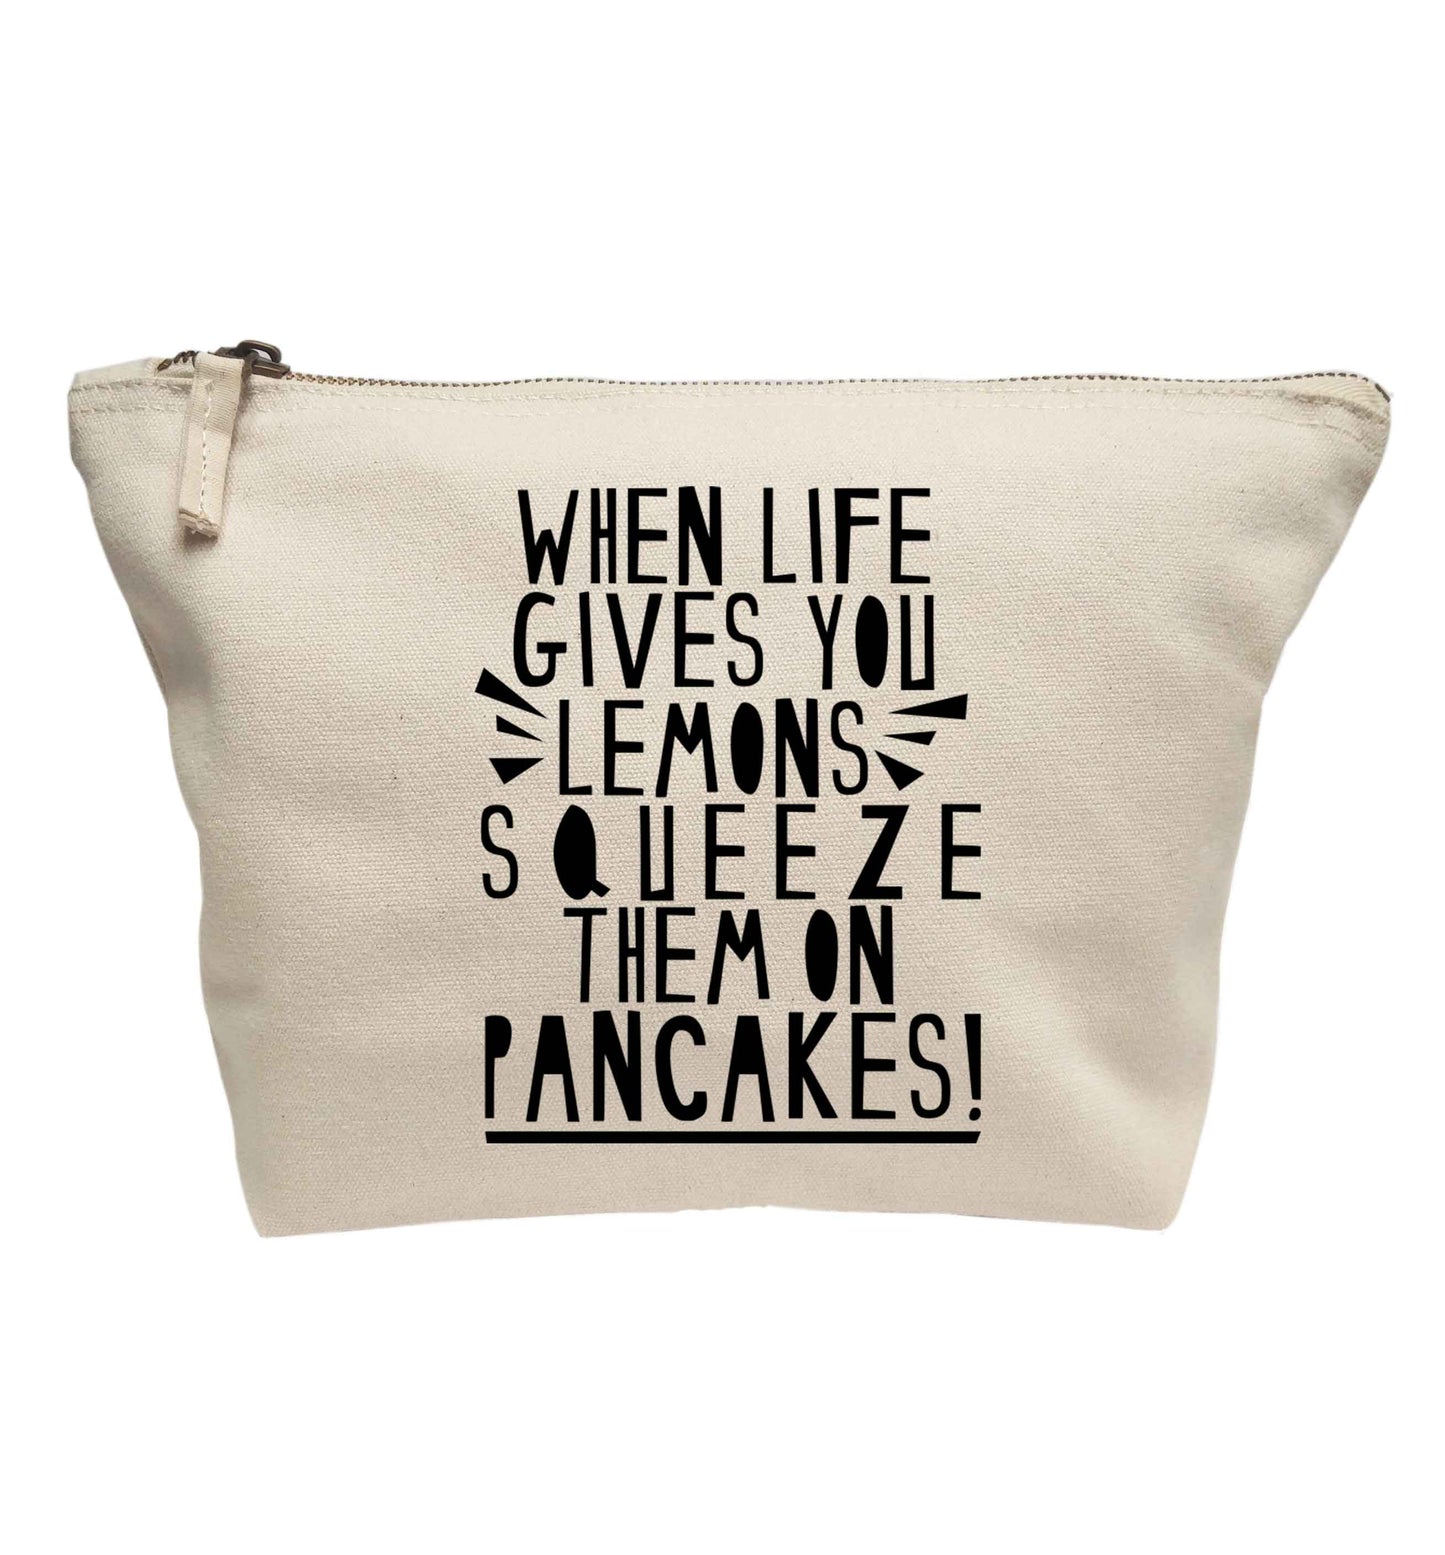 When life gives you lemons squeeze them on pancakes! | Makeup / wash bag